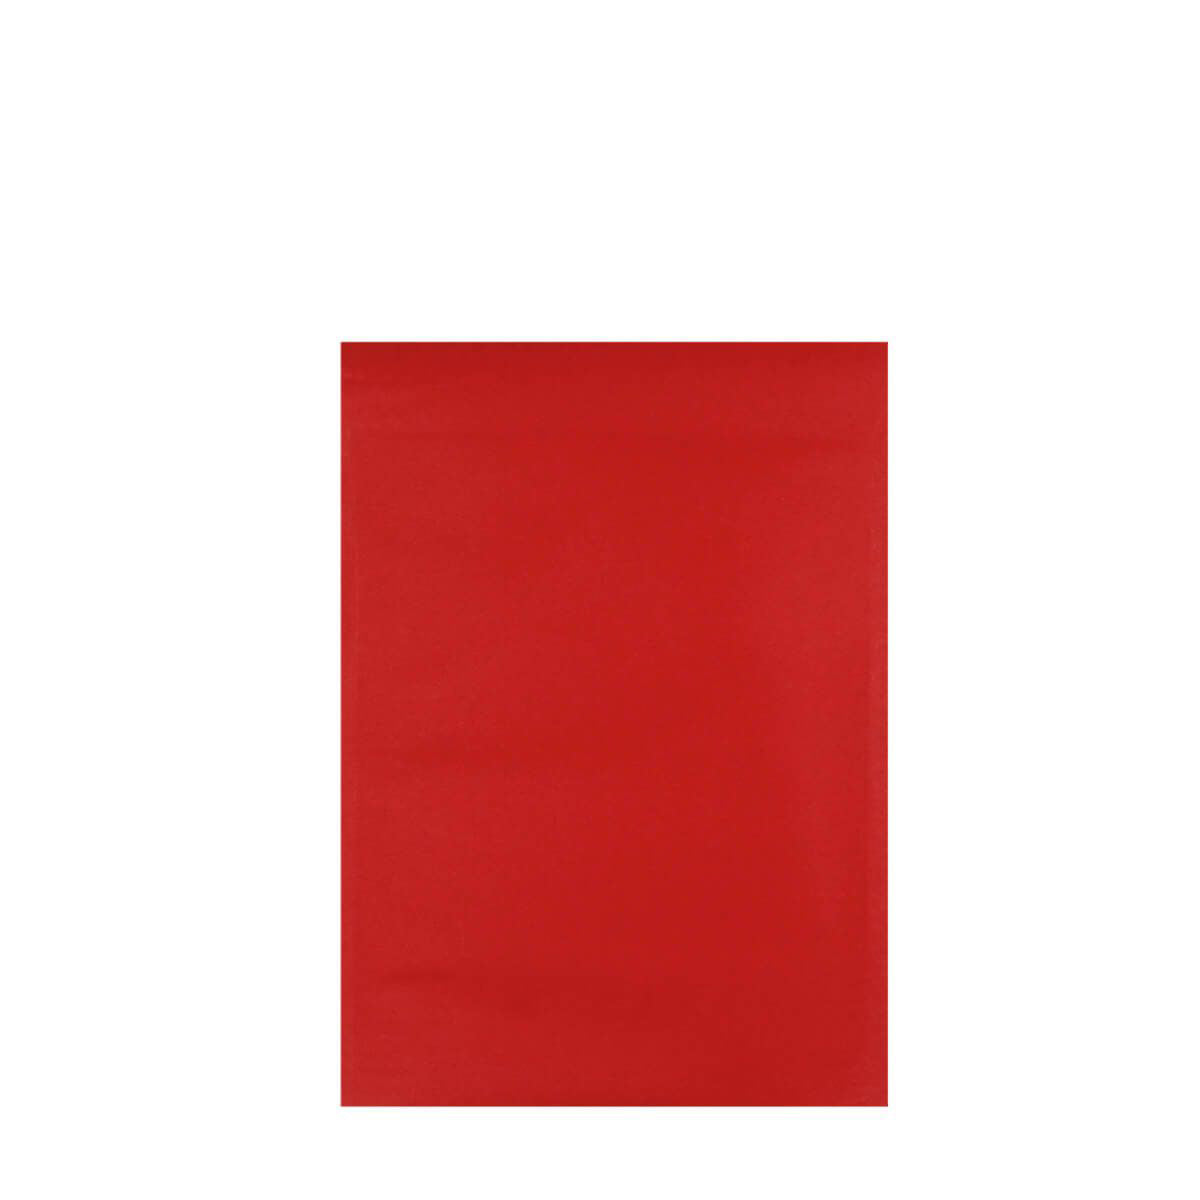 165mm x 100mm Eco Friendly Recyclable Red Padded Envelope [Qty 200] - All Colour Envelopes